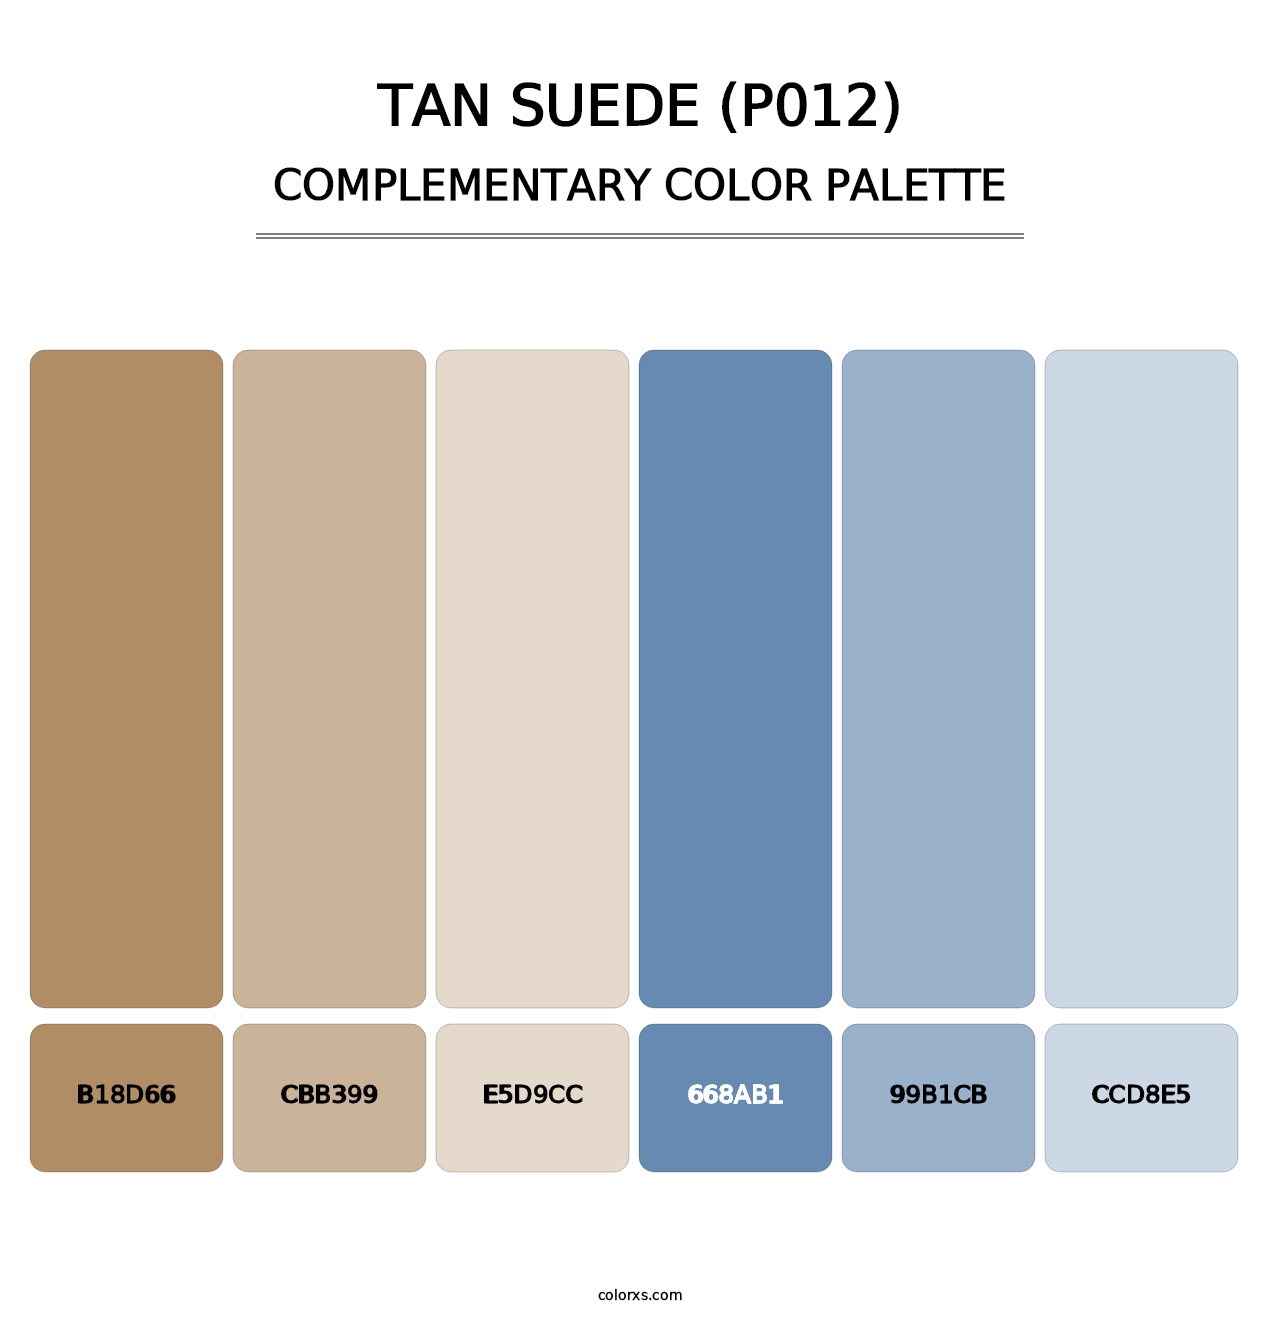 Tan Suede (P012) - Complementary Color Palette